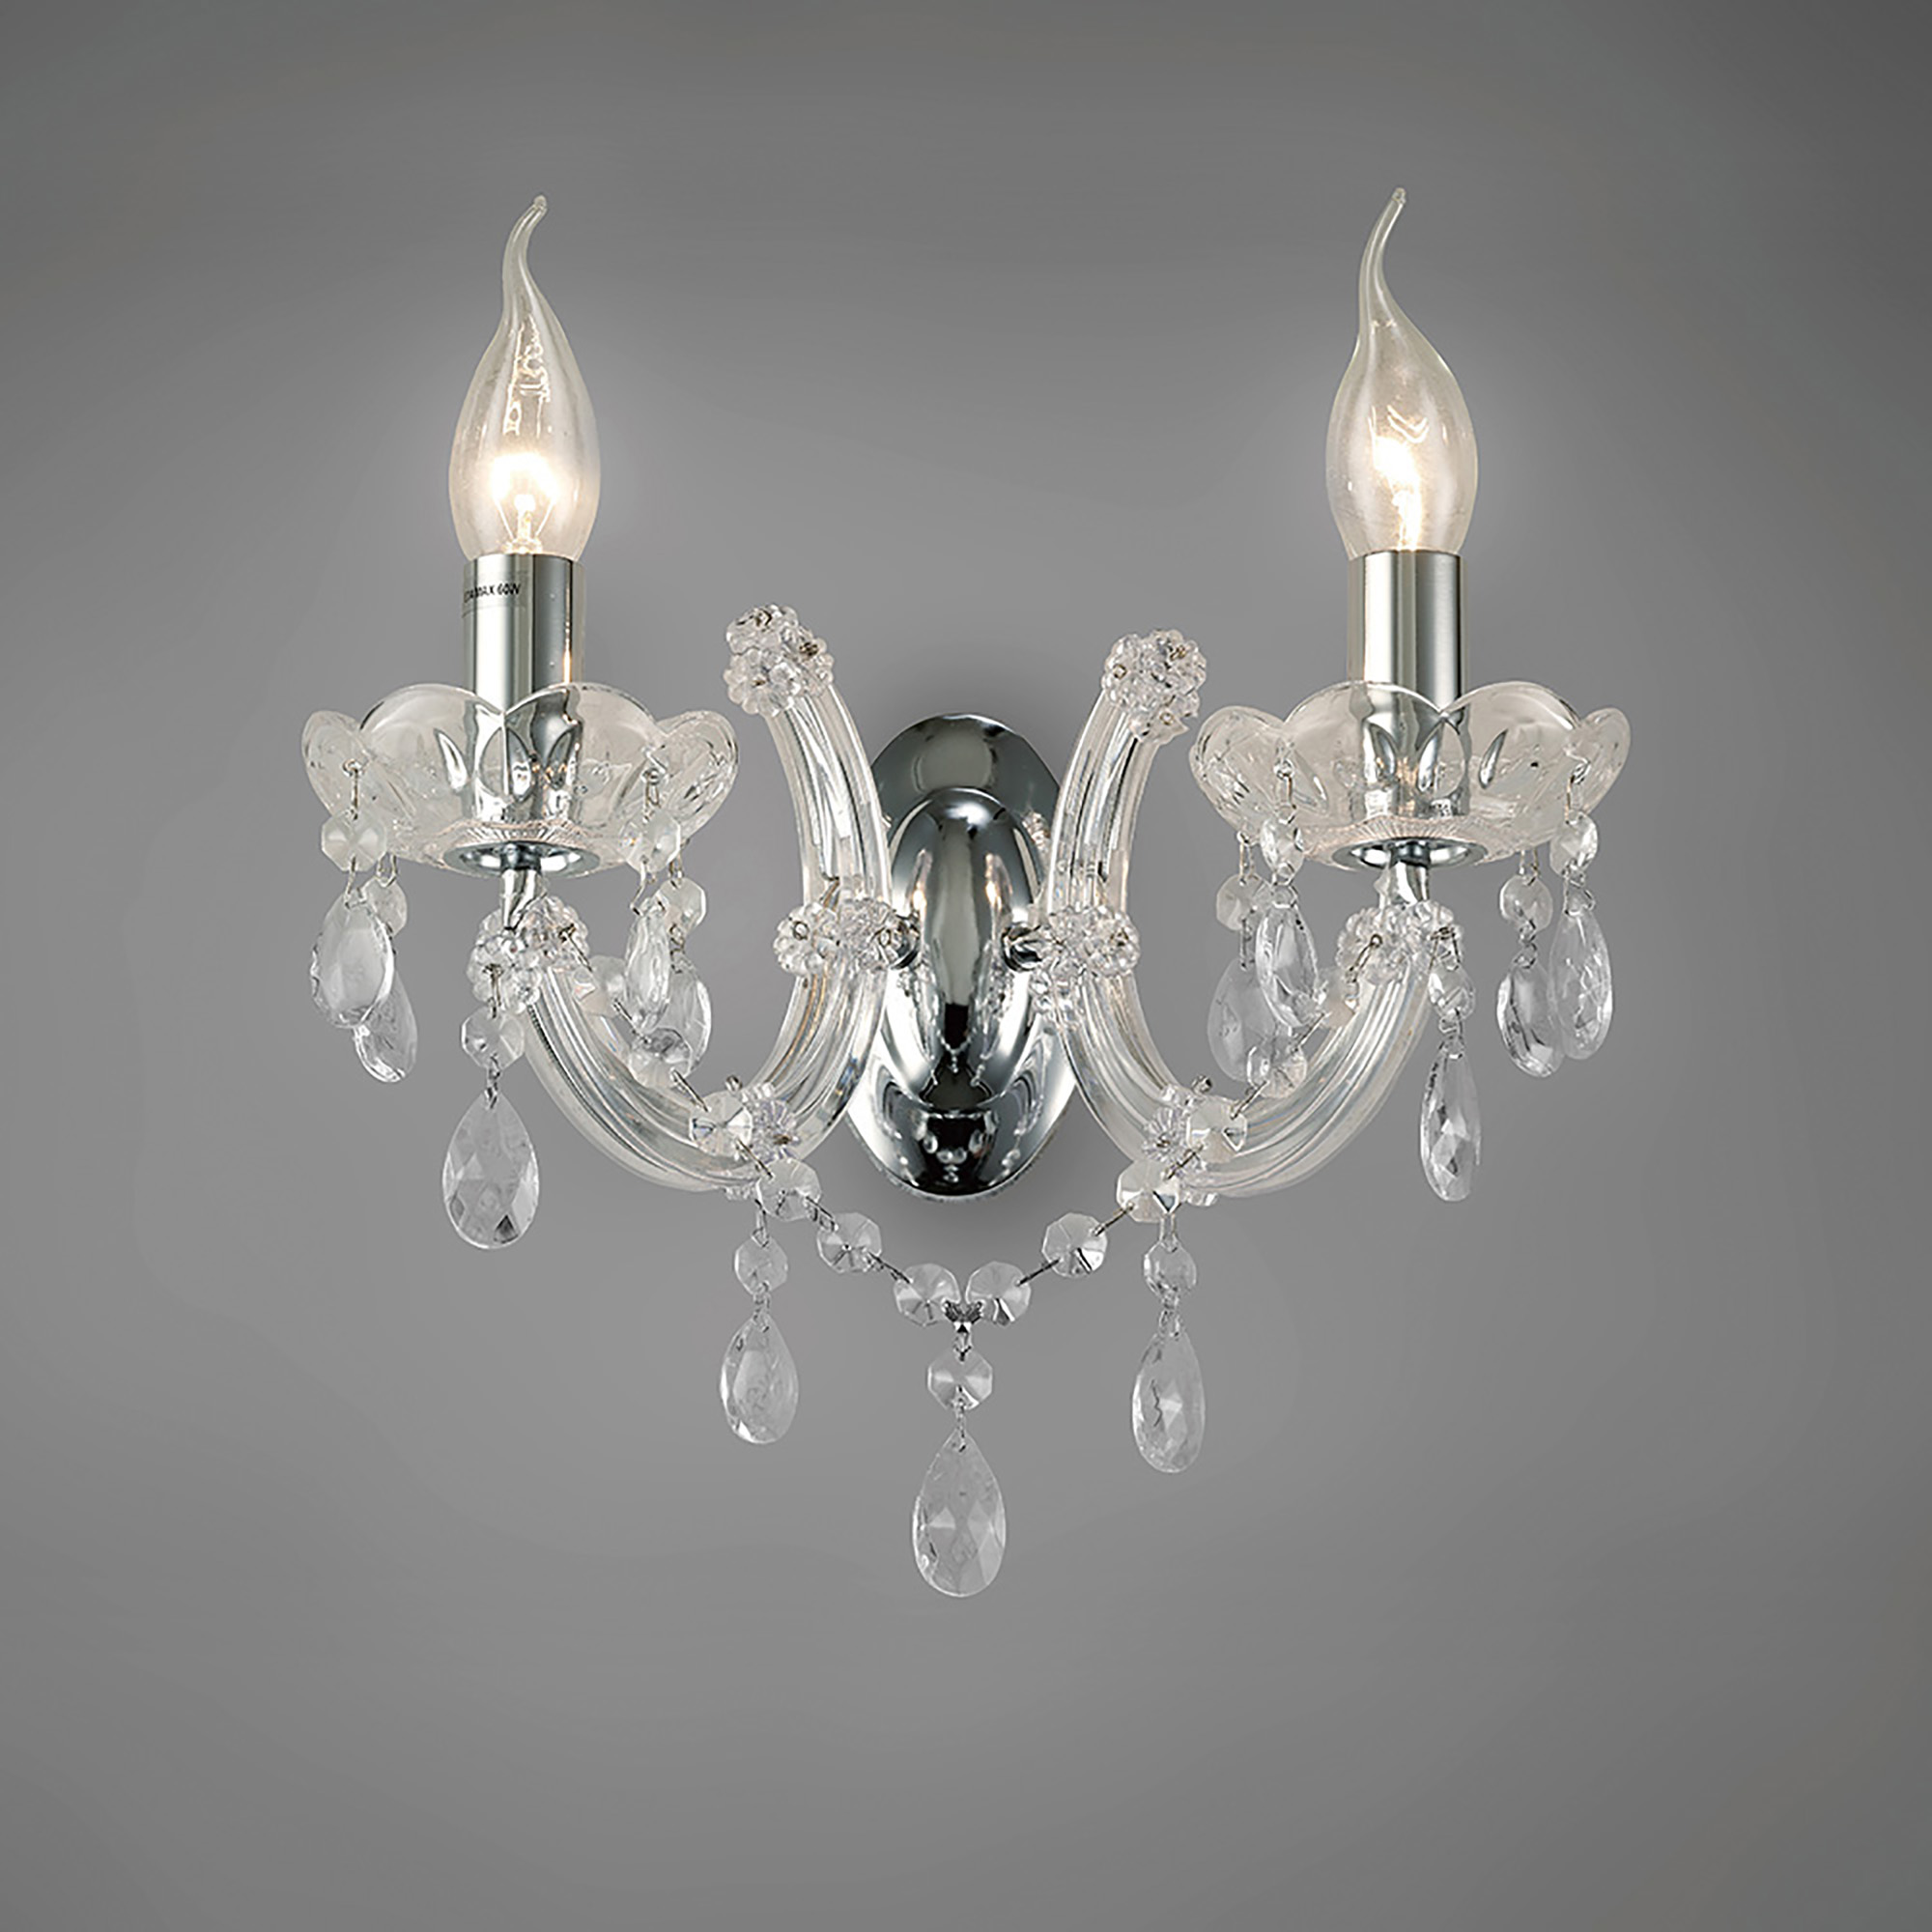 D0024  Gabrielle Glass Wall Lamp 2 Light (Glass Sconce) Polished Chrome